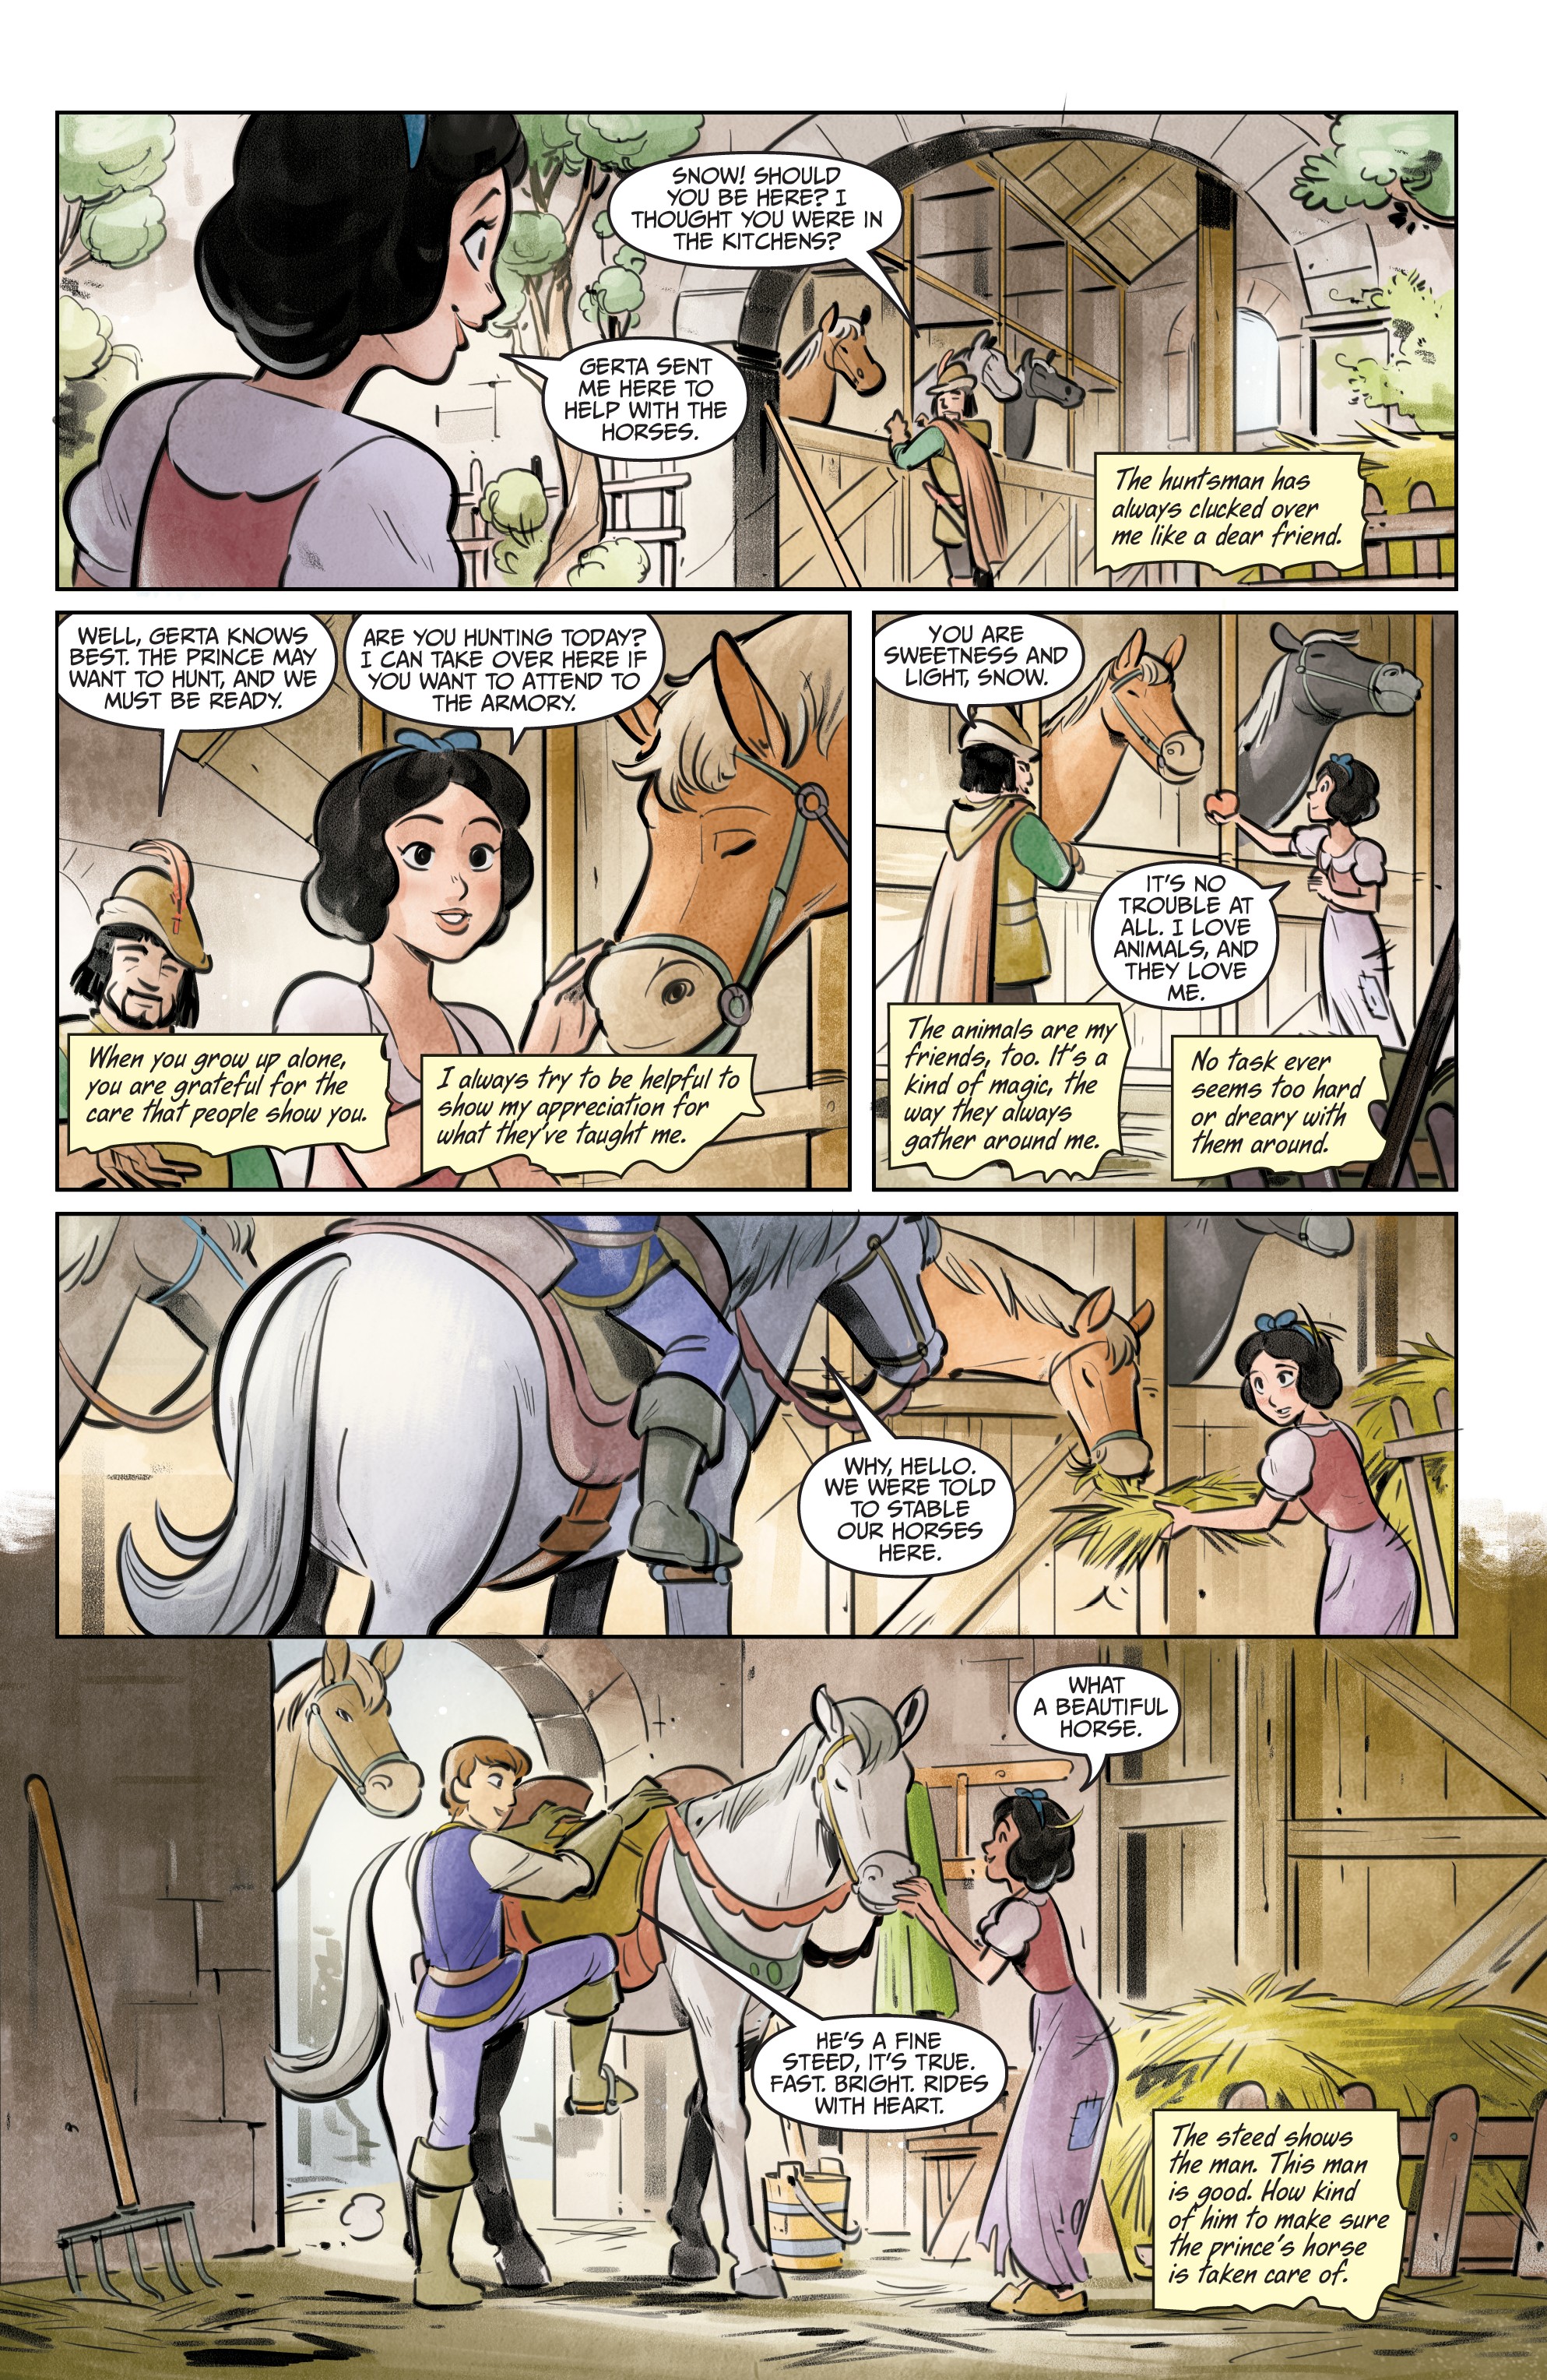 Snow White and the Seven Dwarfs (2019-): Chapter 1 - Page 6